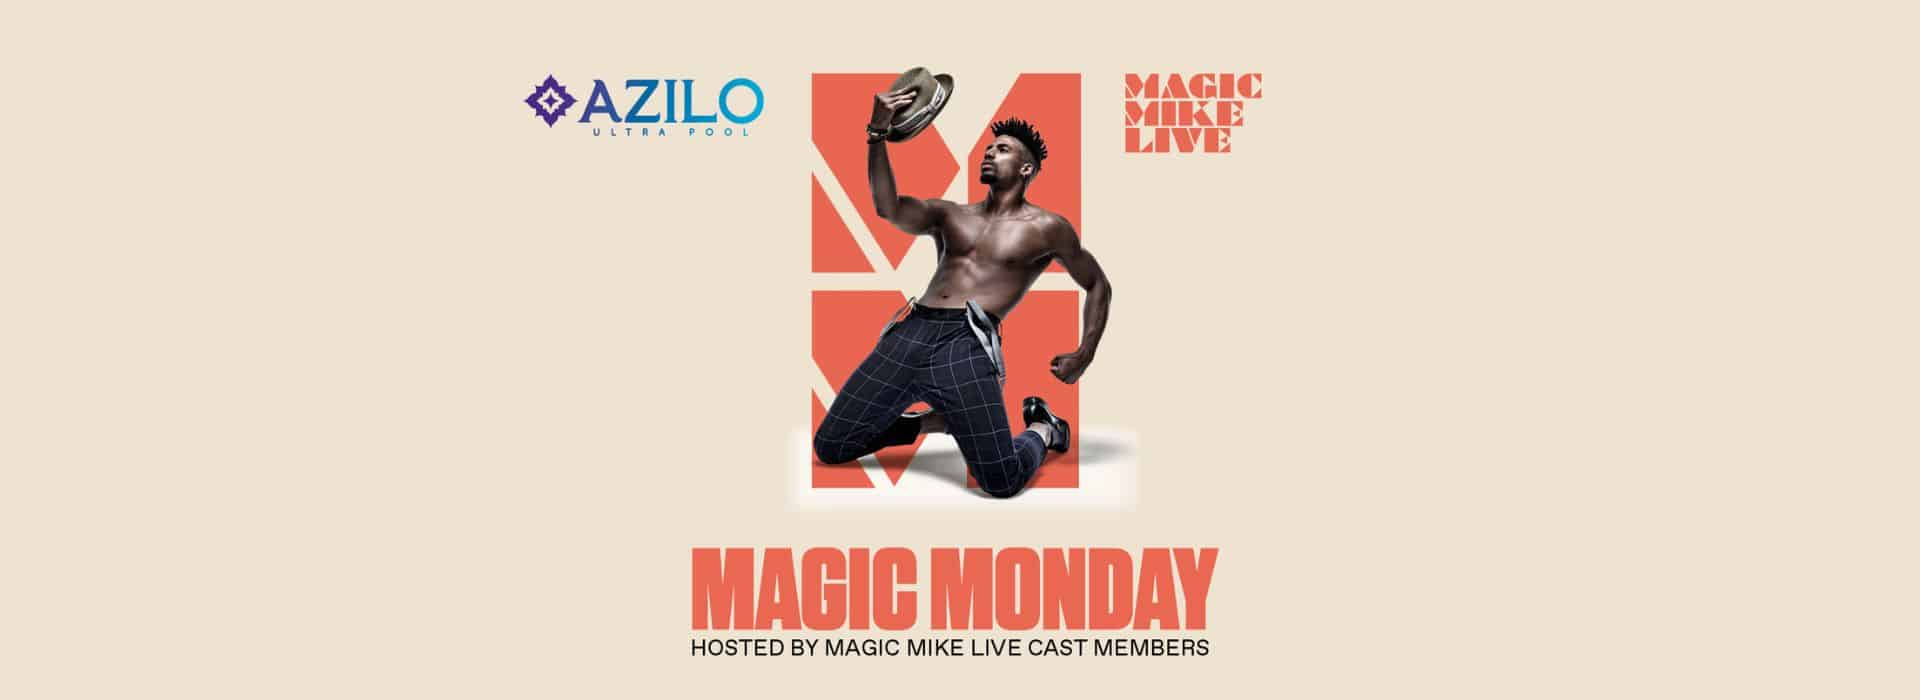 Magic Monday Magic Mike Live creative to promote the cast walking around the pool